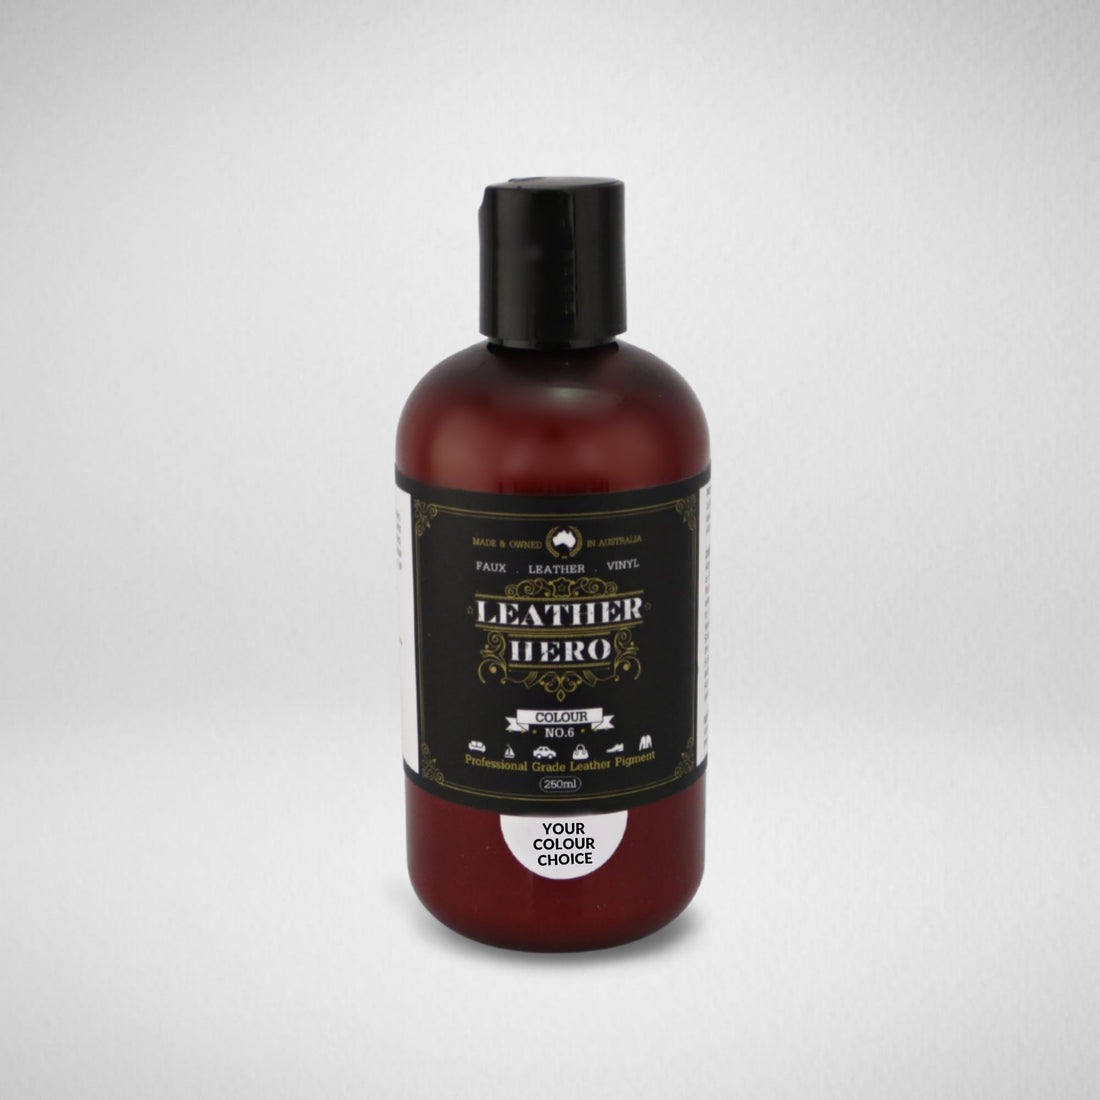 Leather Paint - Pink Leather Repair & Recolouring Leather Hero Australia